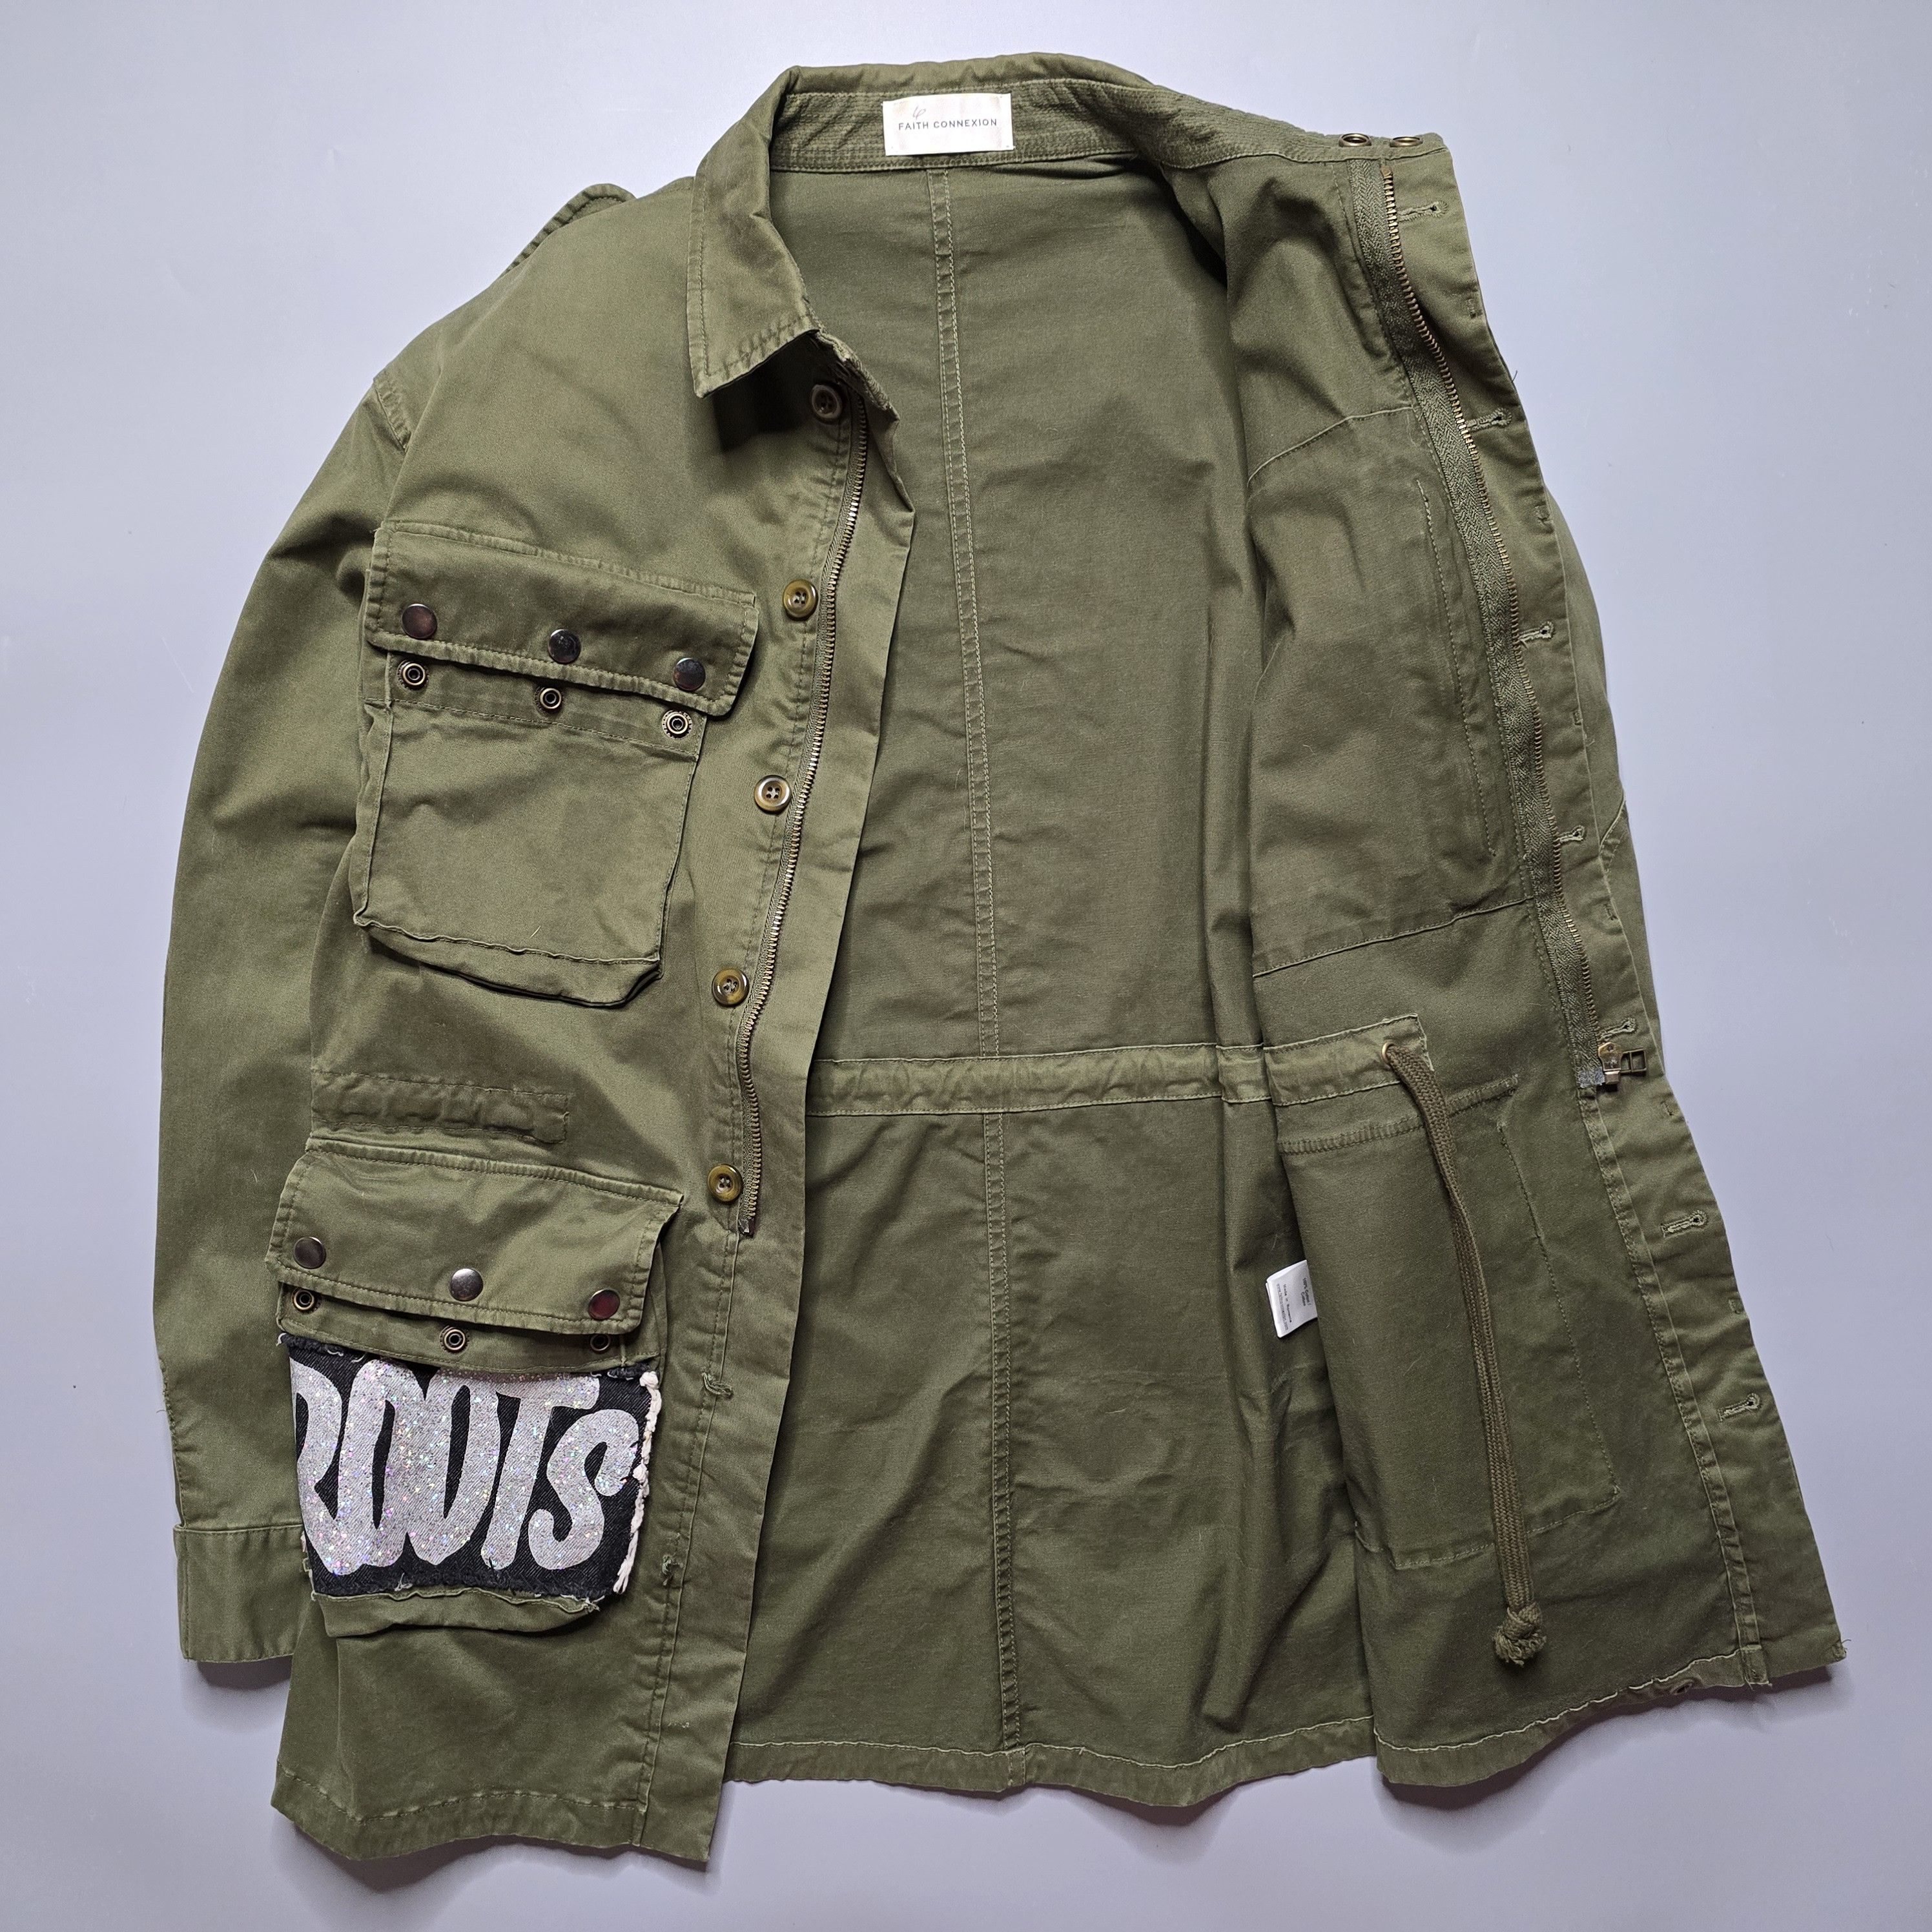 Faith Connexion - Hand-Painted Crown Tag M65 Field Jacket - 2